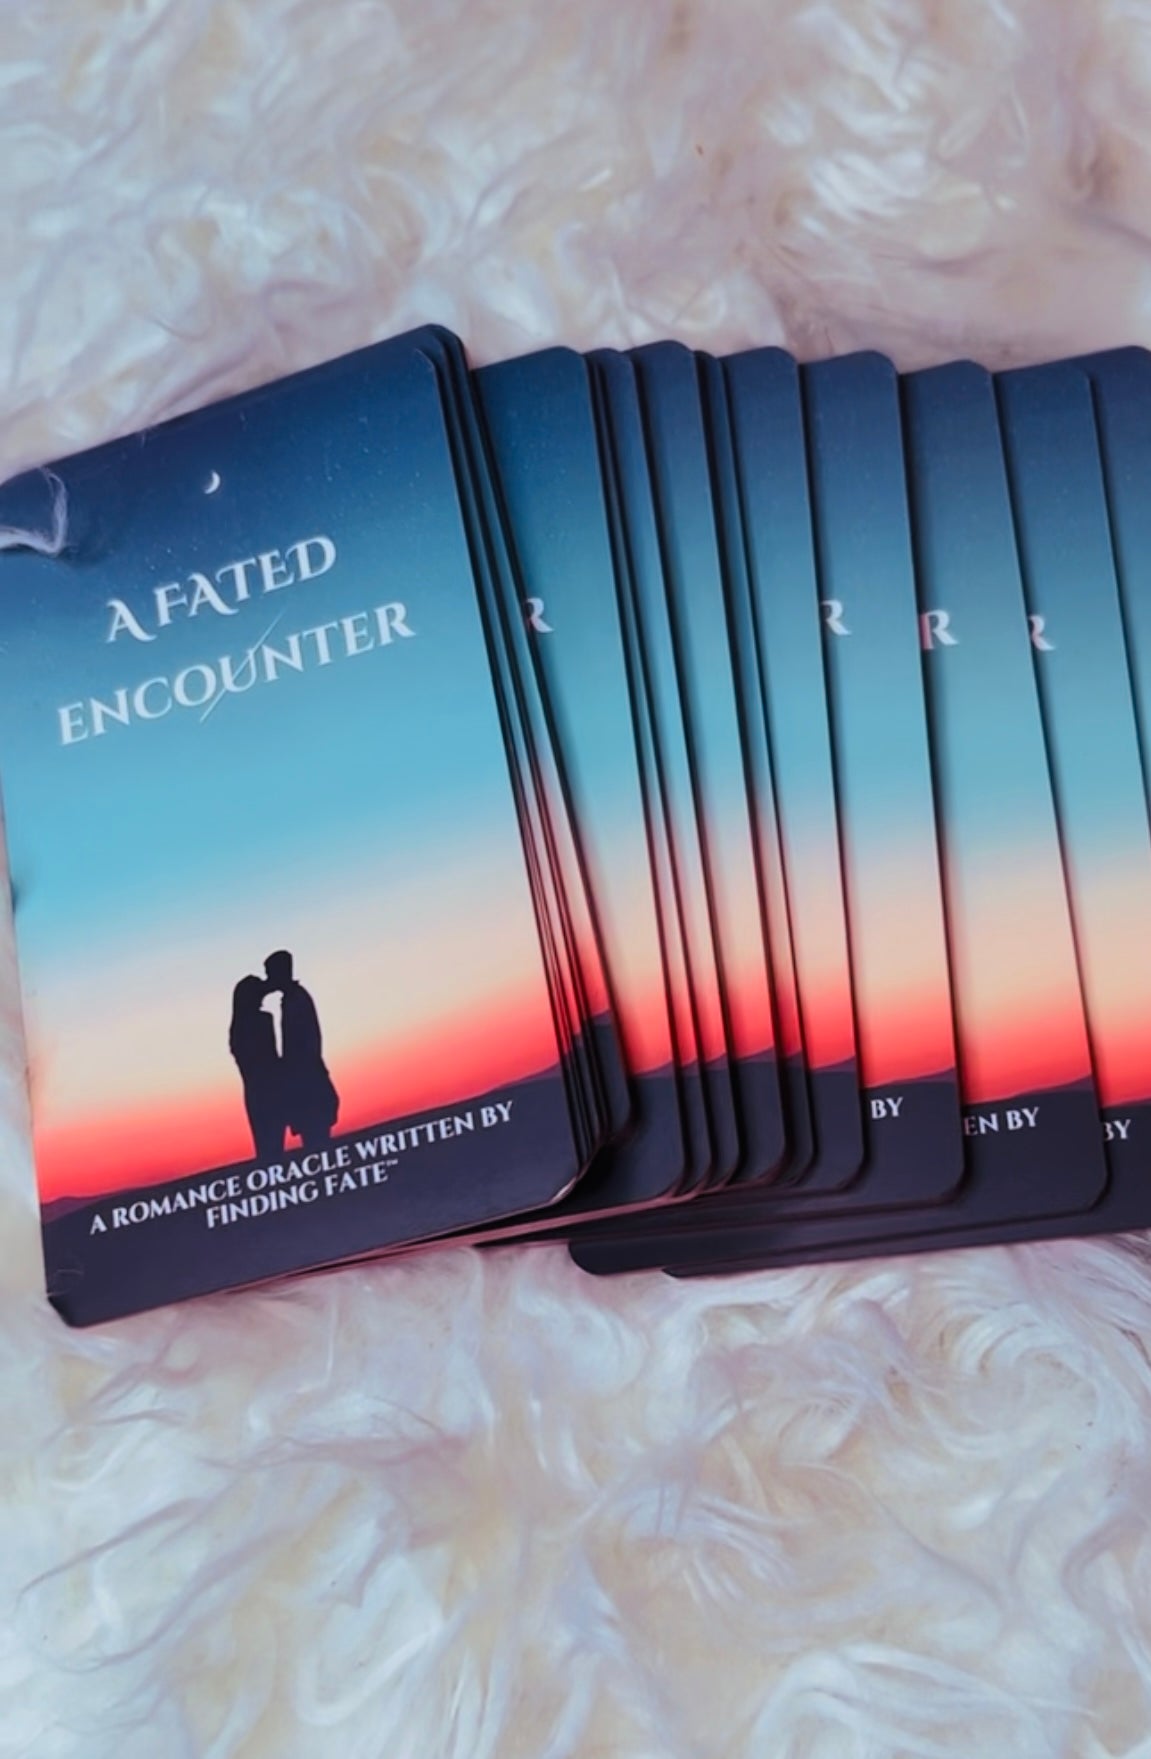 A Fated Encounter-Romance Oracle Deck